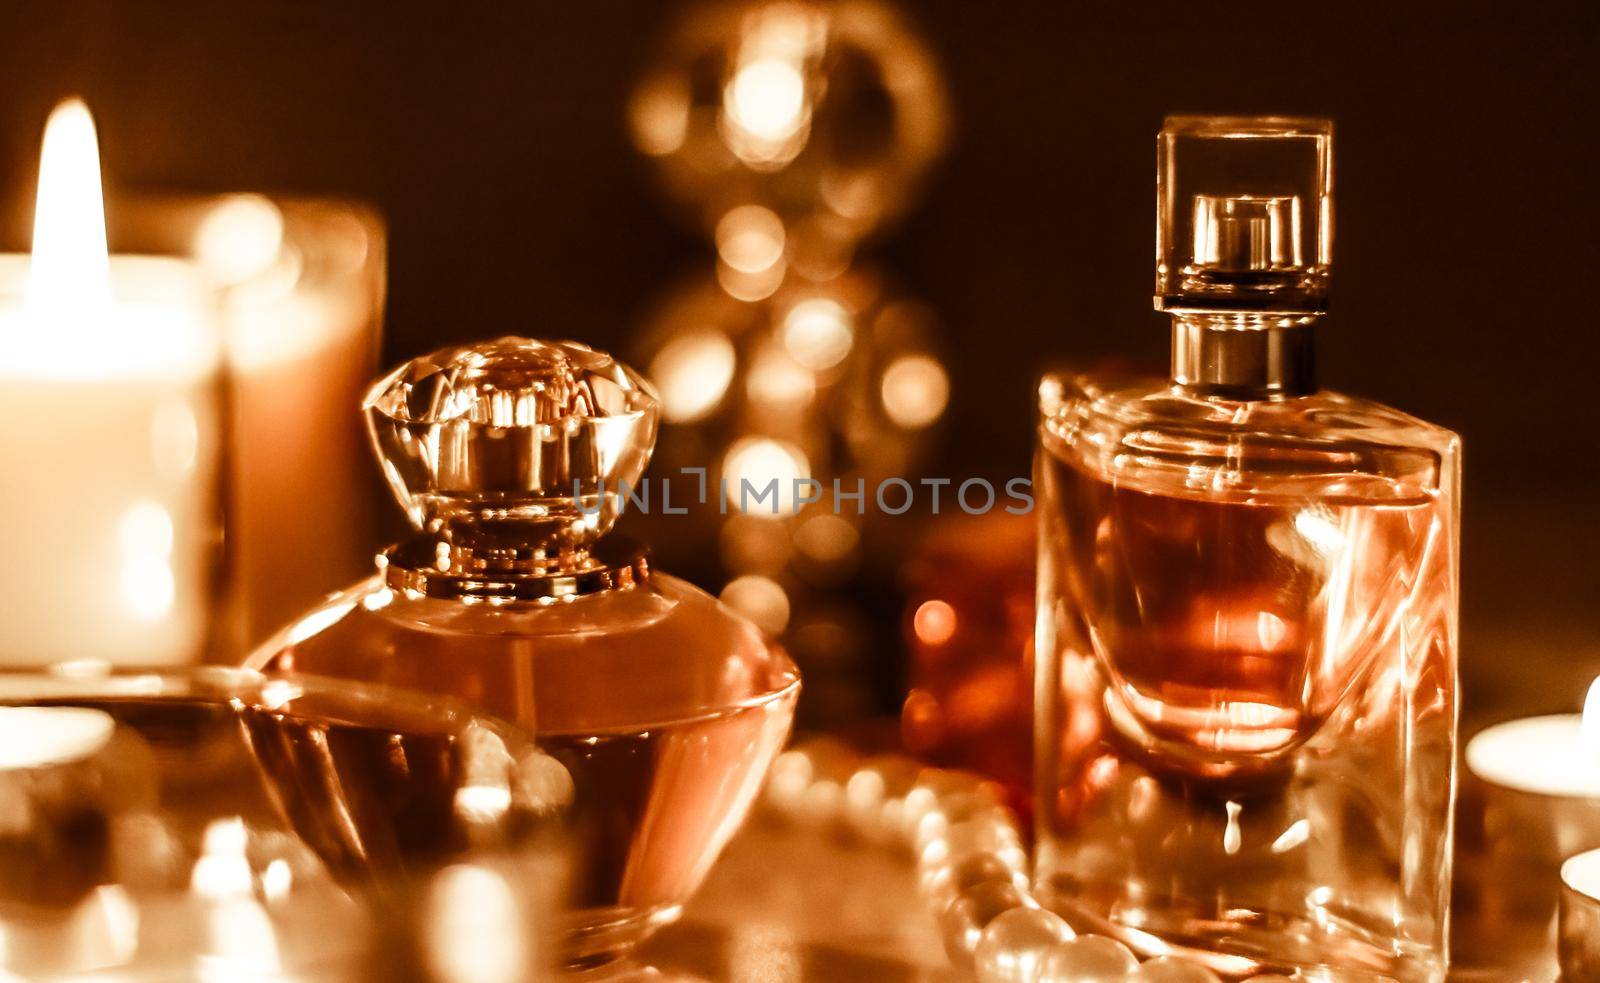 Perfume bottle and vintage fragrance on glamour vanity table at night, pearls jewellery and eau de parfum as holiday gift, luxury beauty brand present by Anneleven